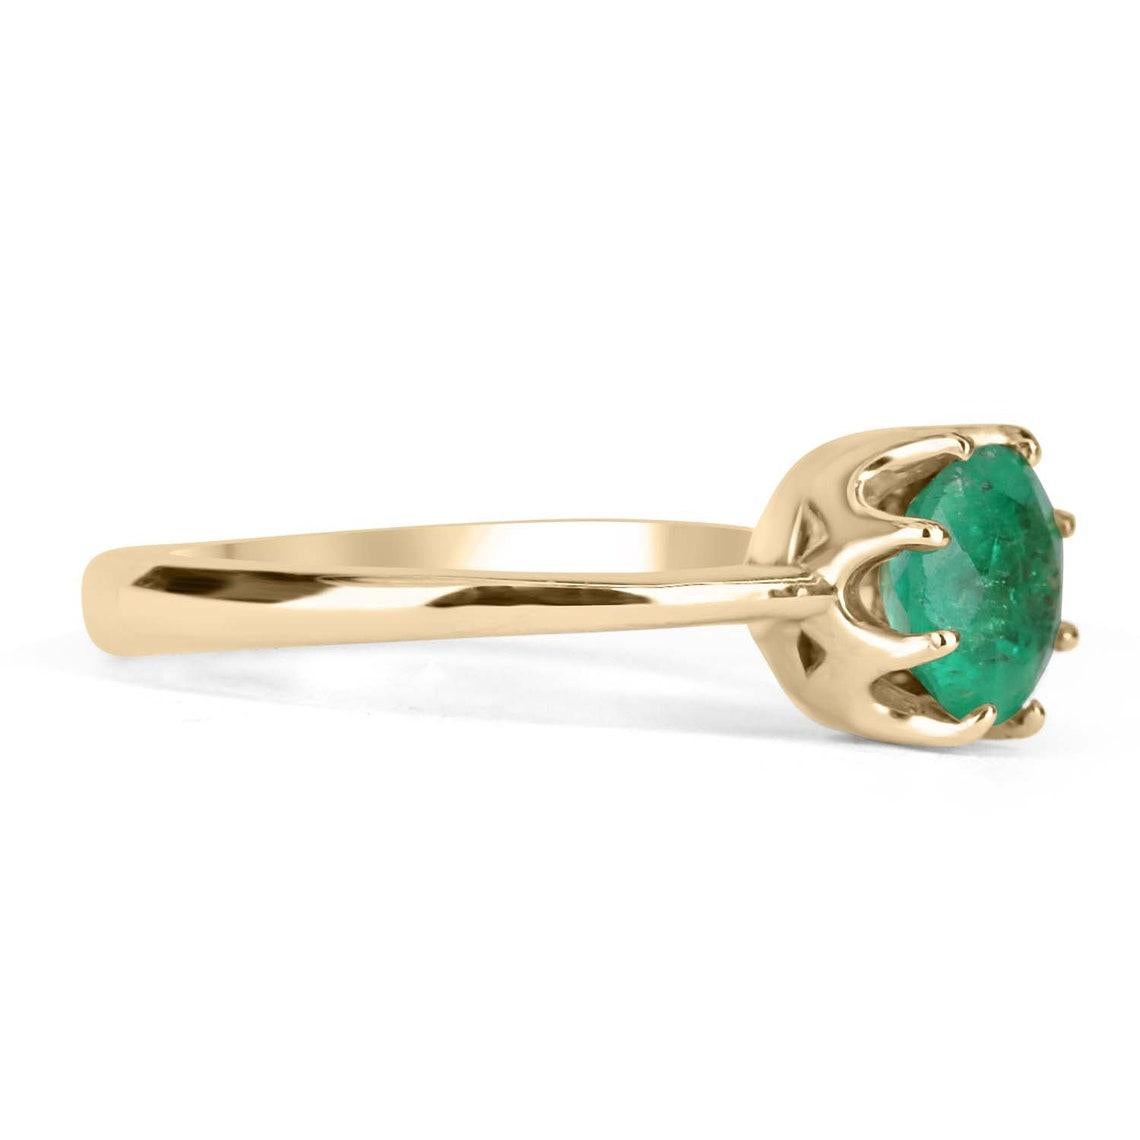 Displayed is a classic emerald 8 prong solitaire, round-cut, vintage ring in 14K yellow gold. This gorgeous solitaire ring carries a full 1.0-carat emerald in a 8-prong setting. Fully faceted, this gemstone showcases excellent shine. The emerald has